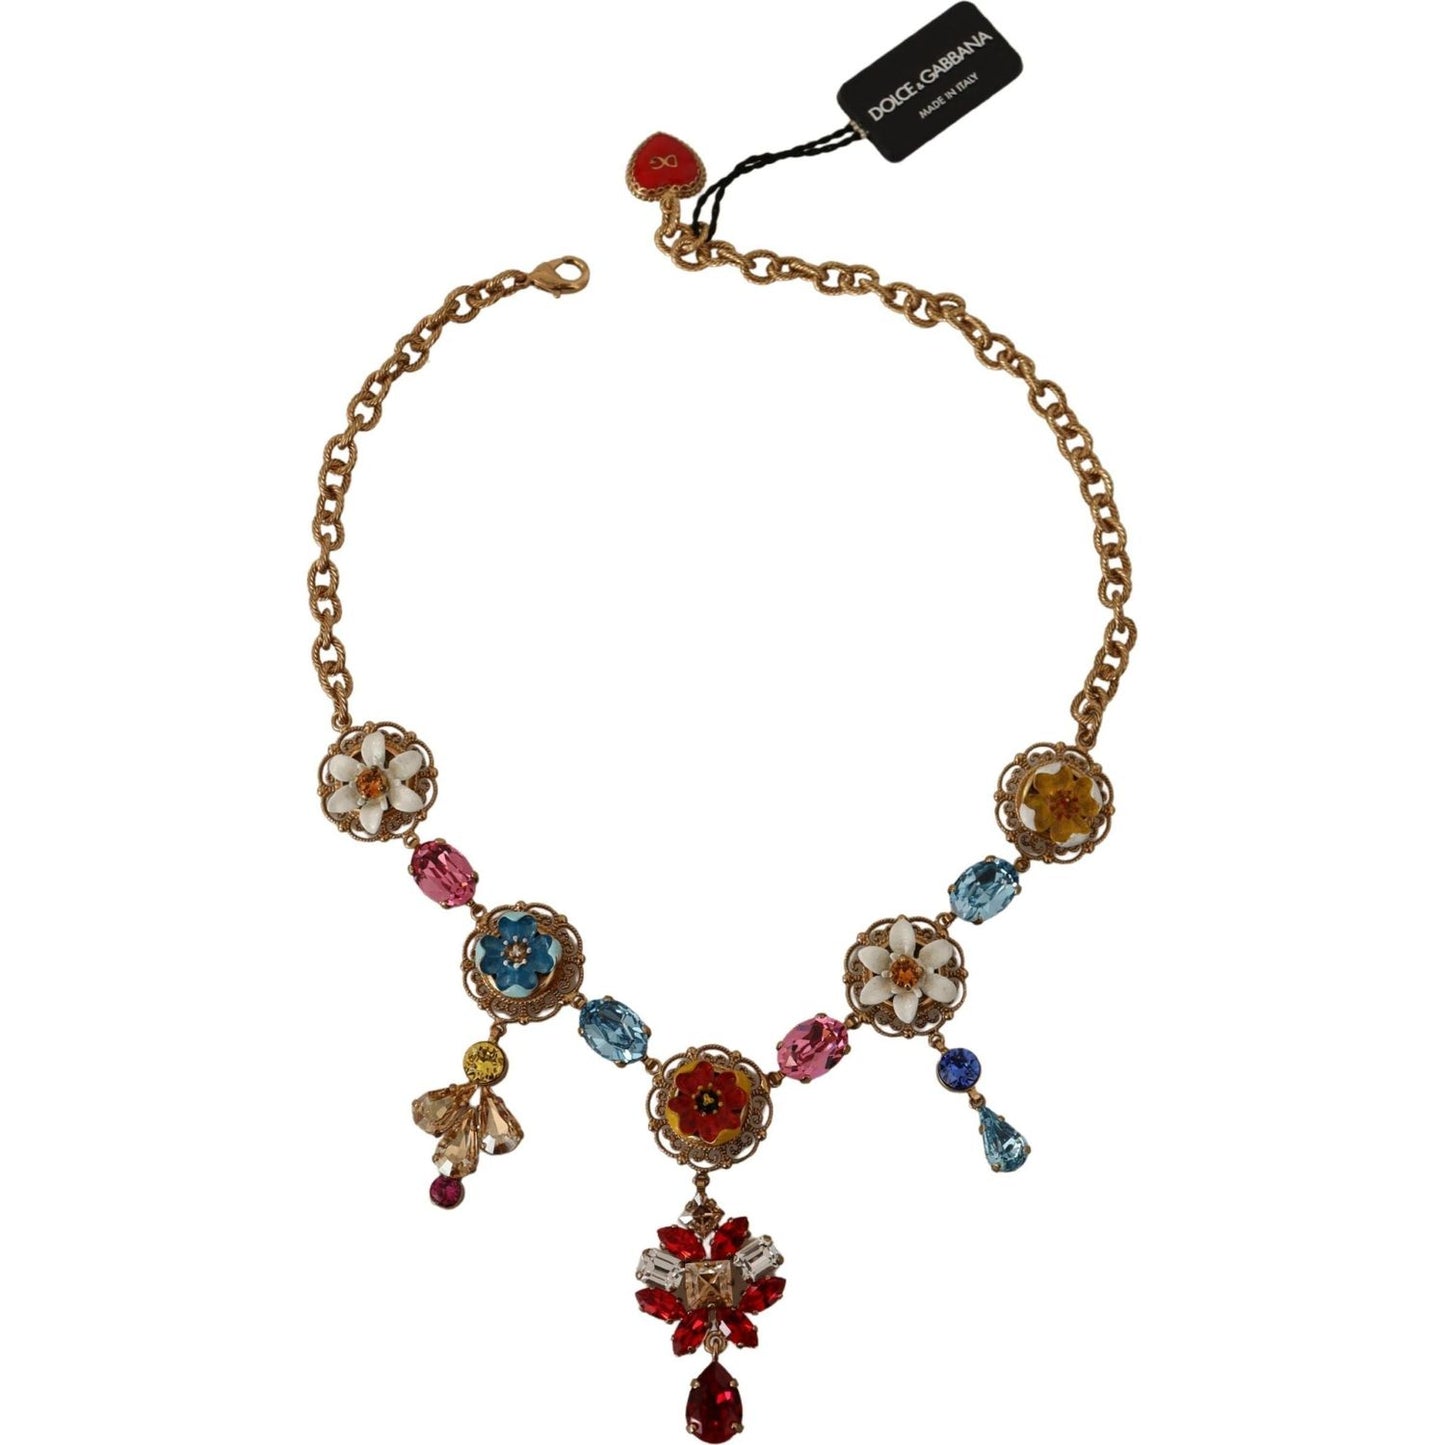 Dolce & Gabbana Elegant Floral Statement Necklace gold-brass-floral-sicily-charms-statement-necklace WOMAN NECKLACE IMG_2055-scaled-31f16330-d1f.jpg